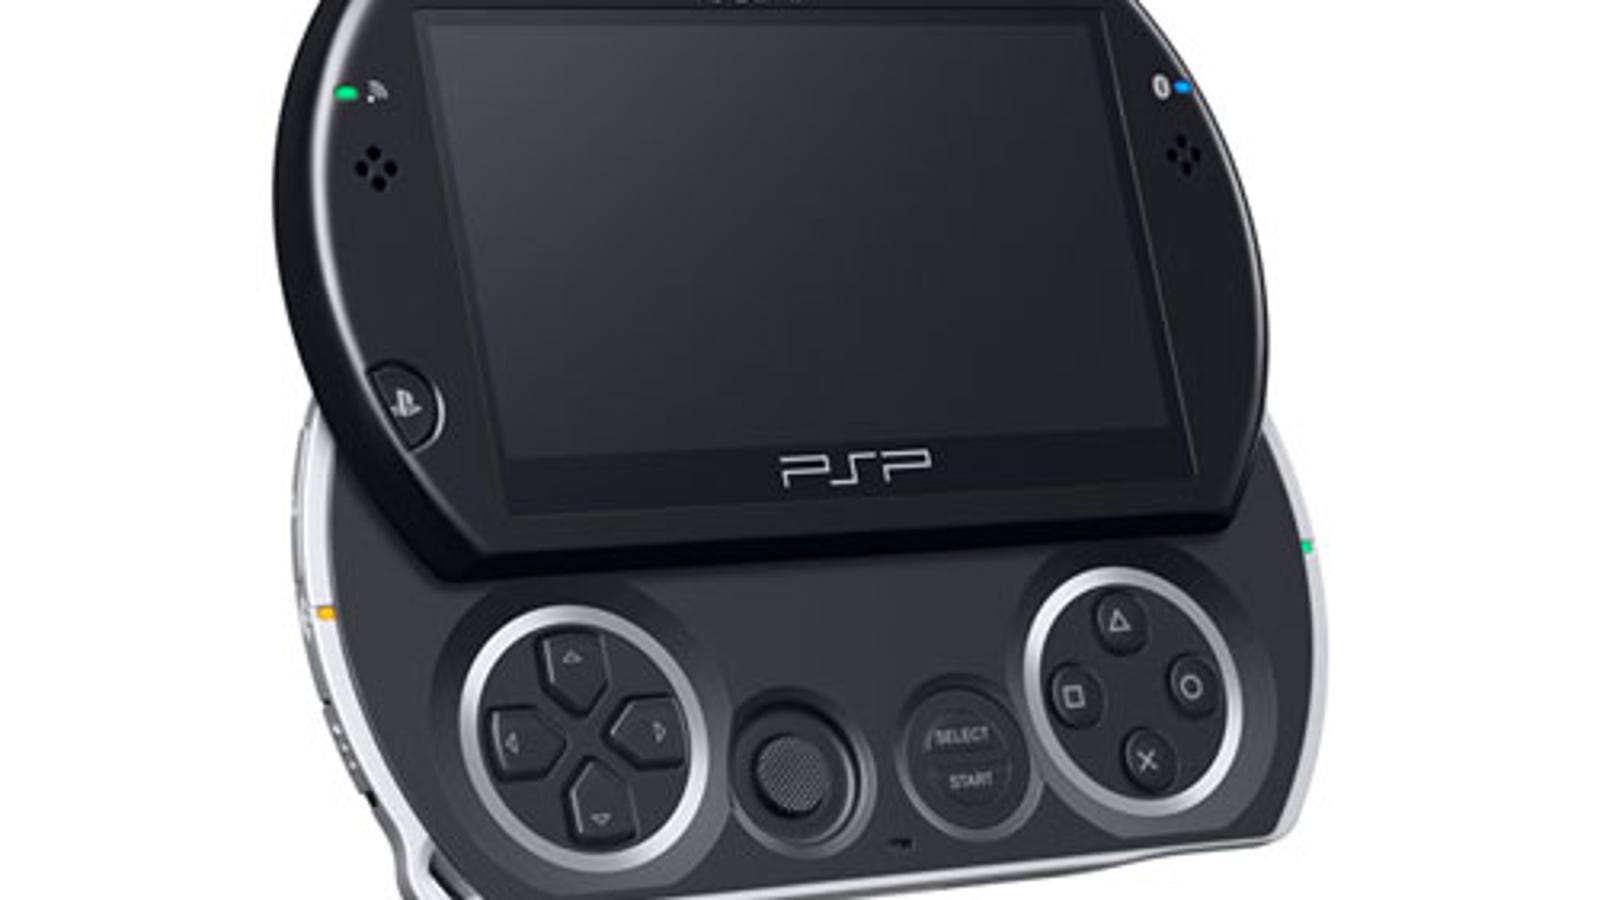 Sony Giving Away Free PSP Games To PSPgo Upgraders